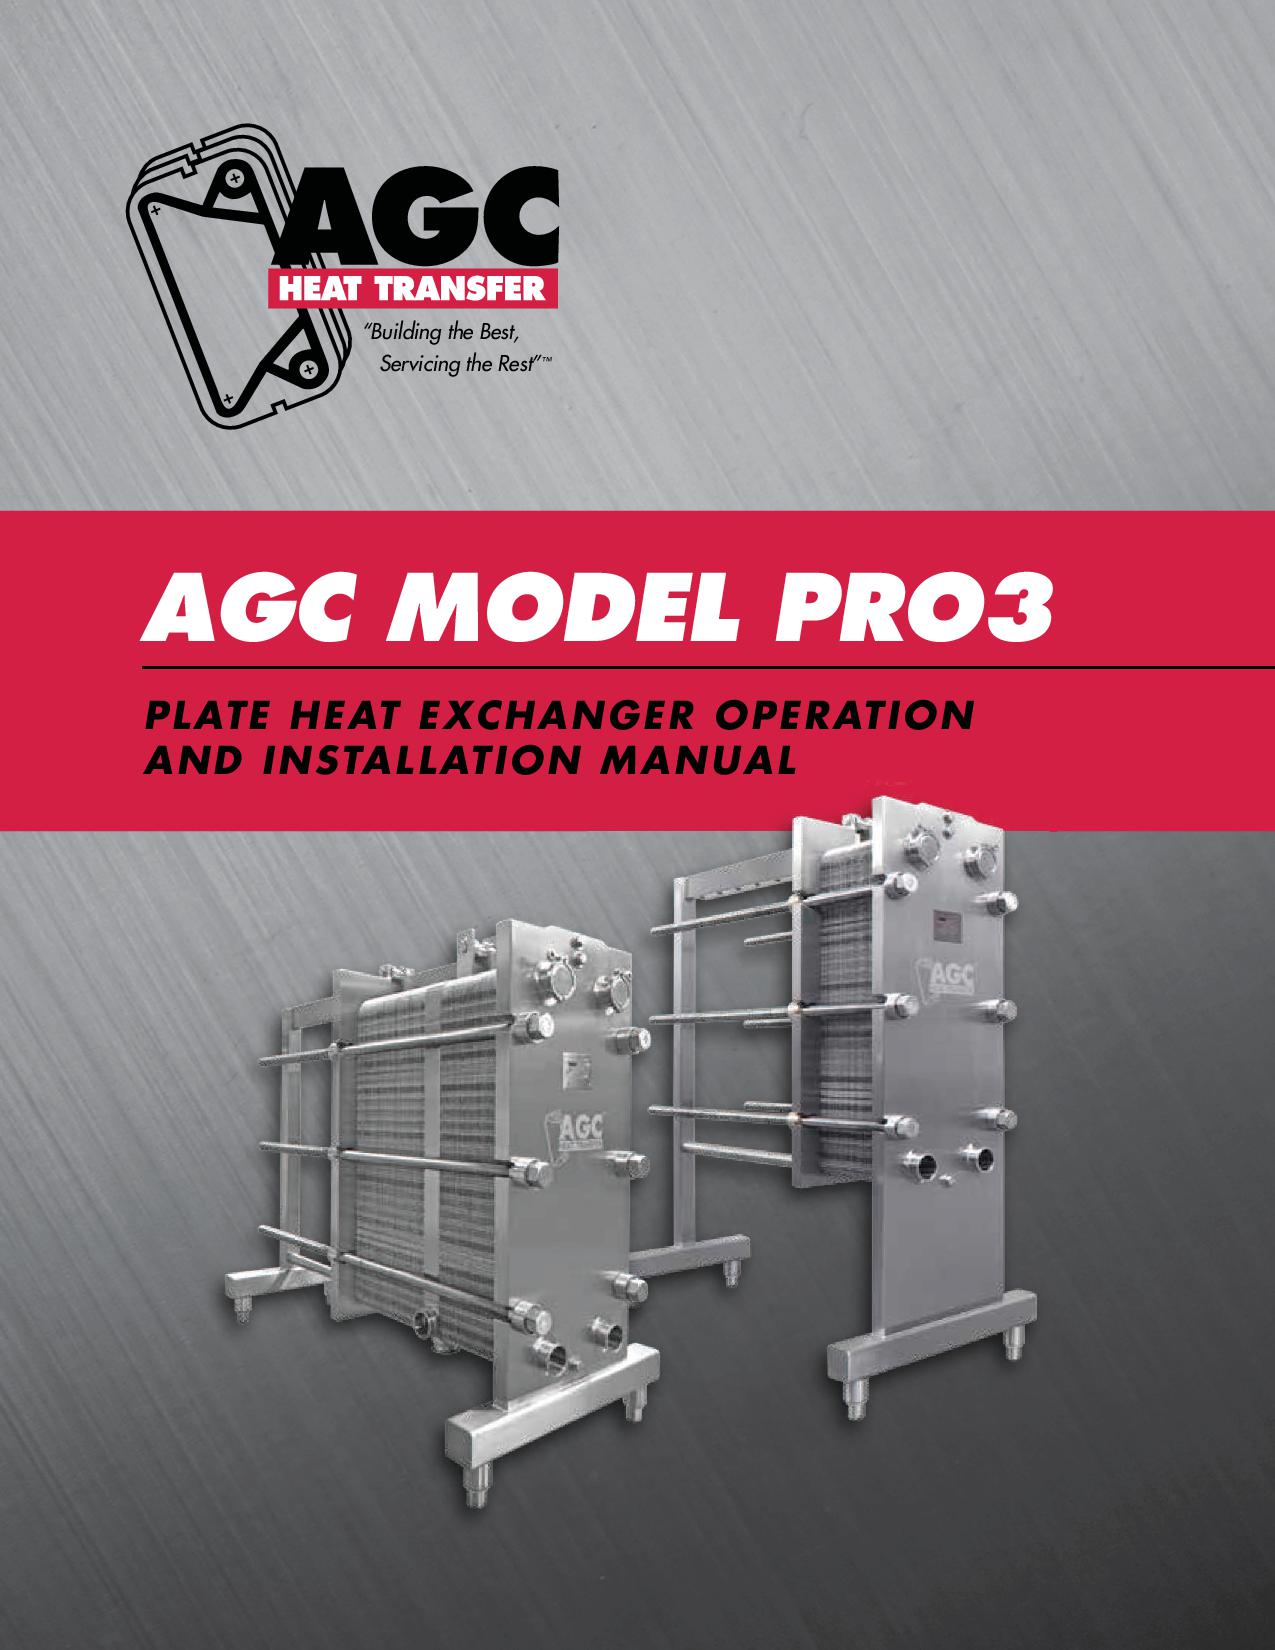 PROFLOW PLATE HEAT EXCHANGER OPERATION AND MAINTENANCE MANUAL